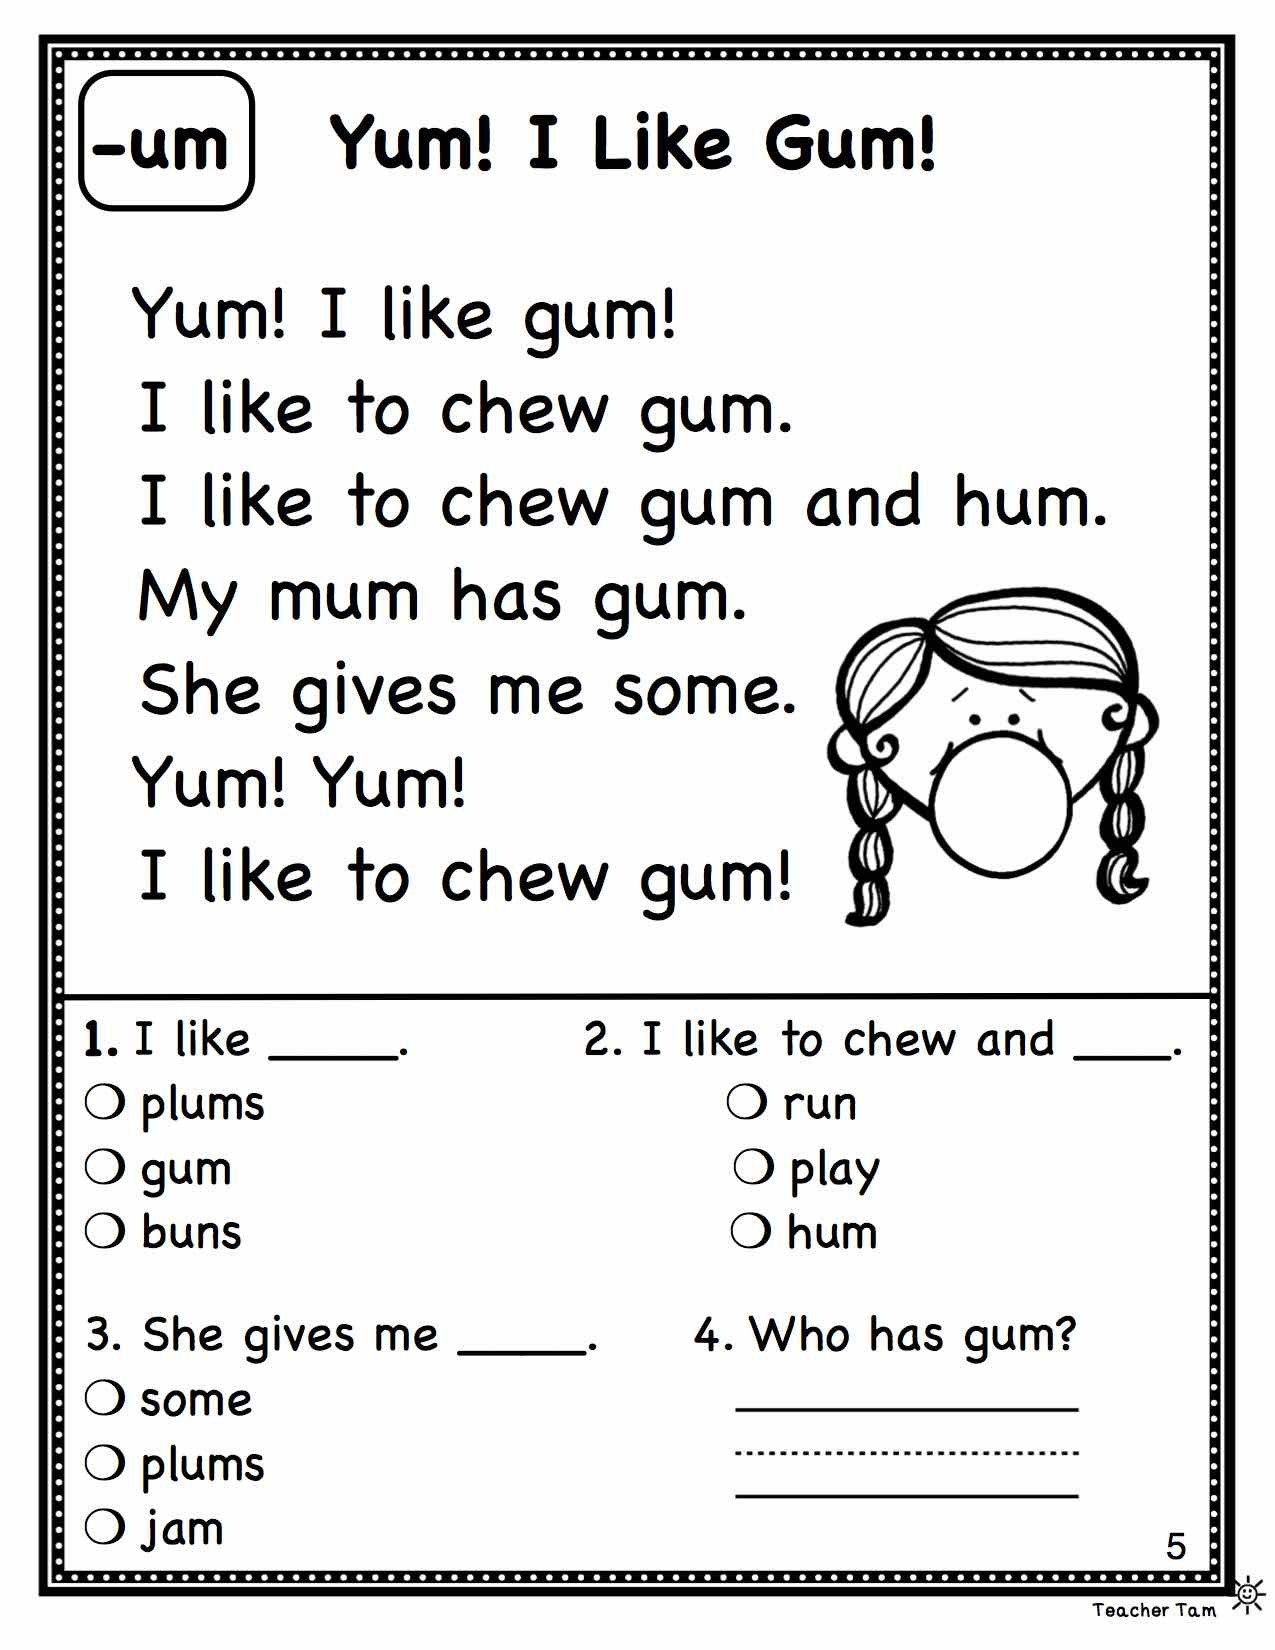 Free Comprehension Worksheets For Grade 1 Image Collections